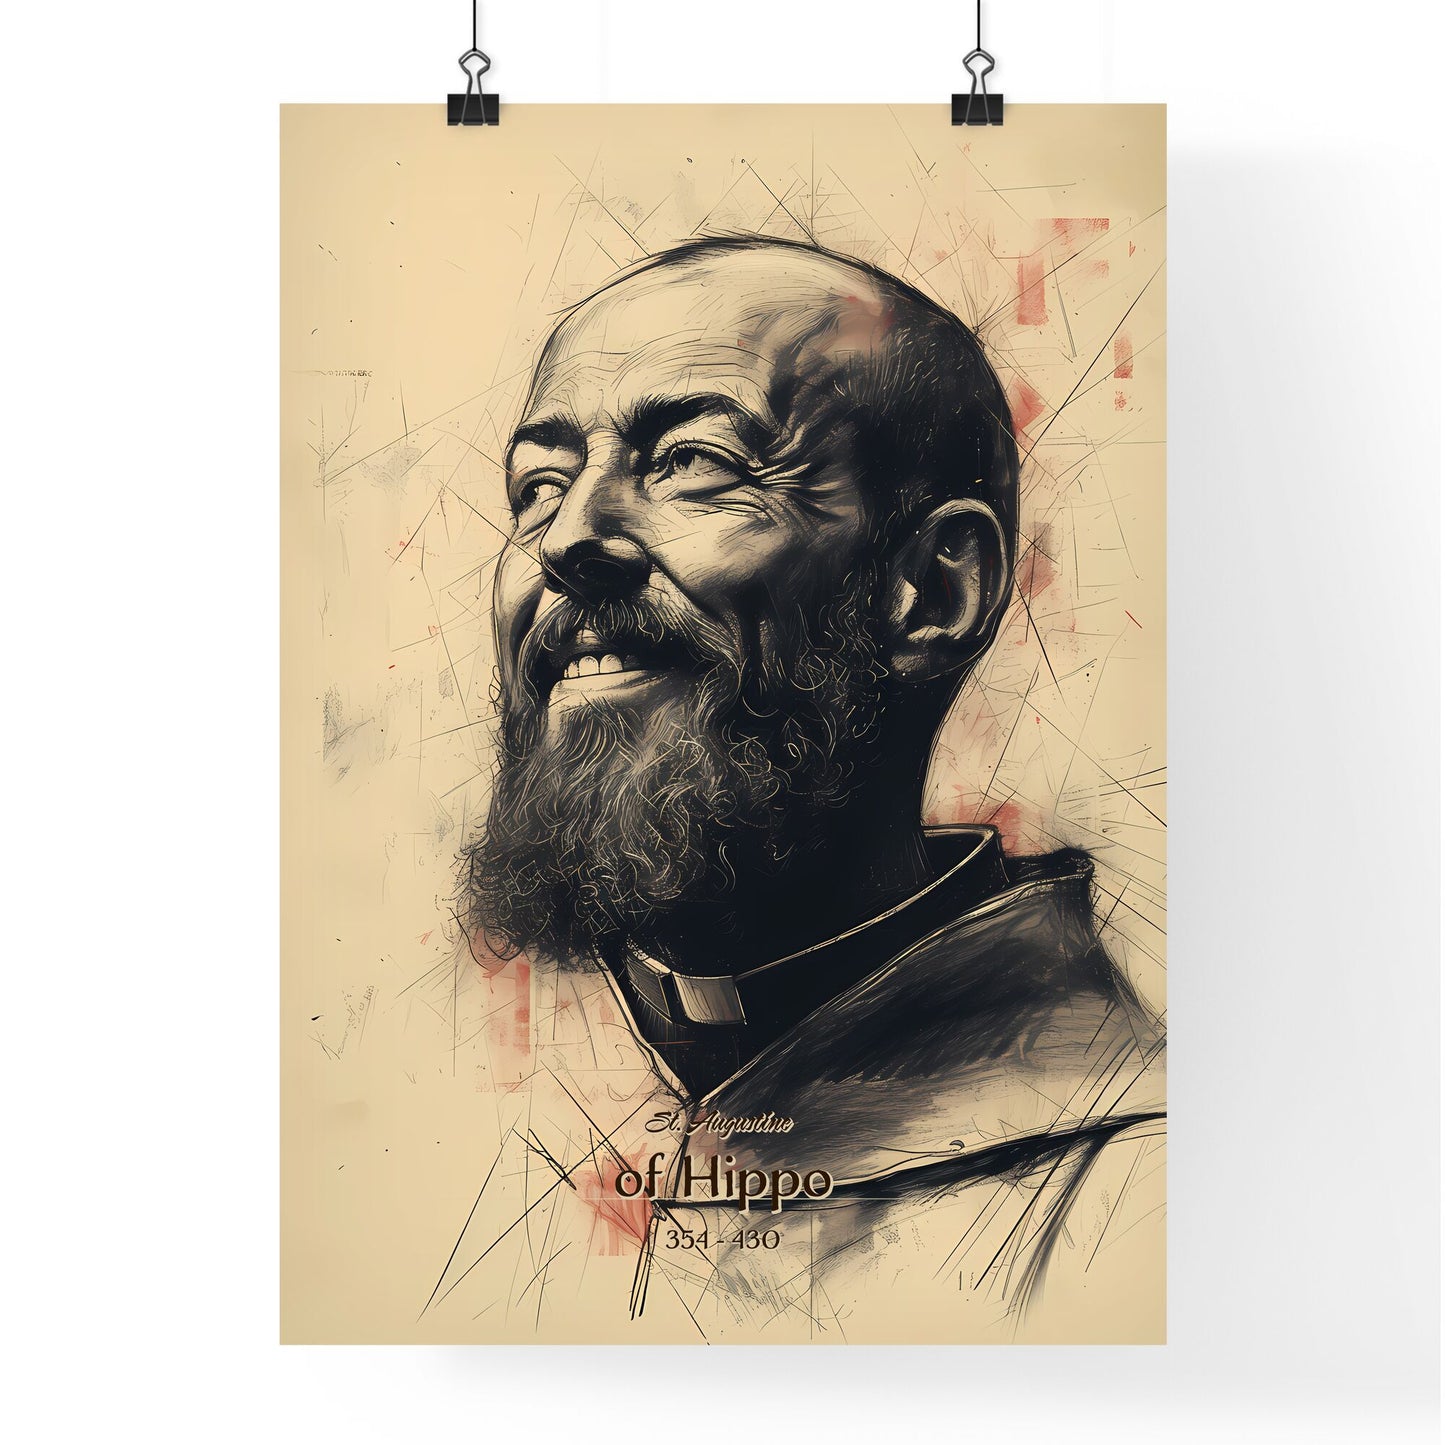 St. Augustine, of Hippo, 354 - 430, A Poster of a drawing of a man with a beard Default Title